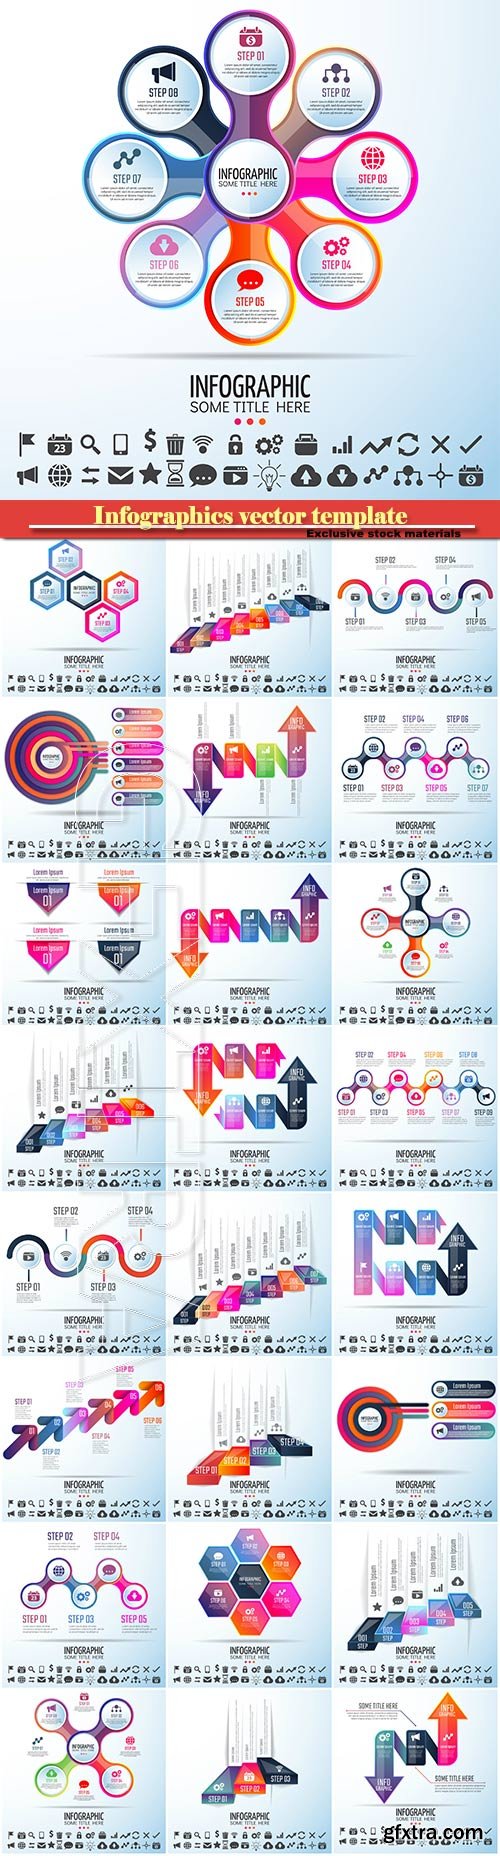 Infographics vector template for business presentations or information banner # 6